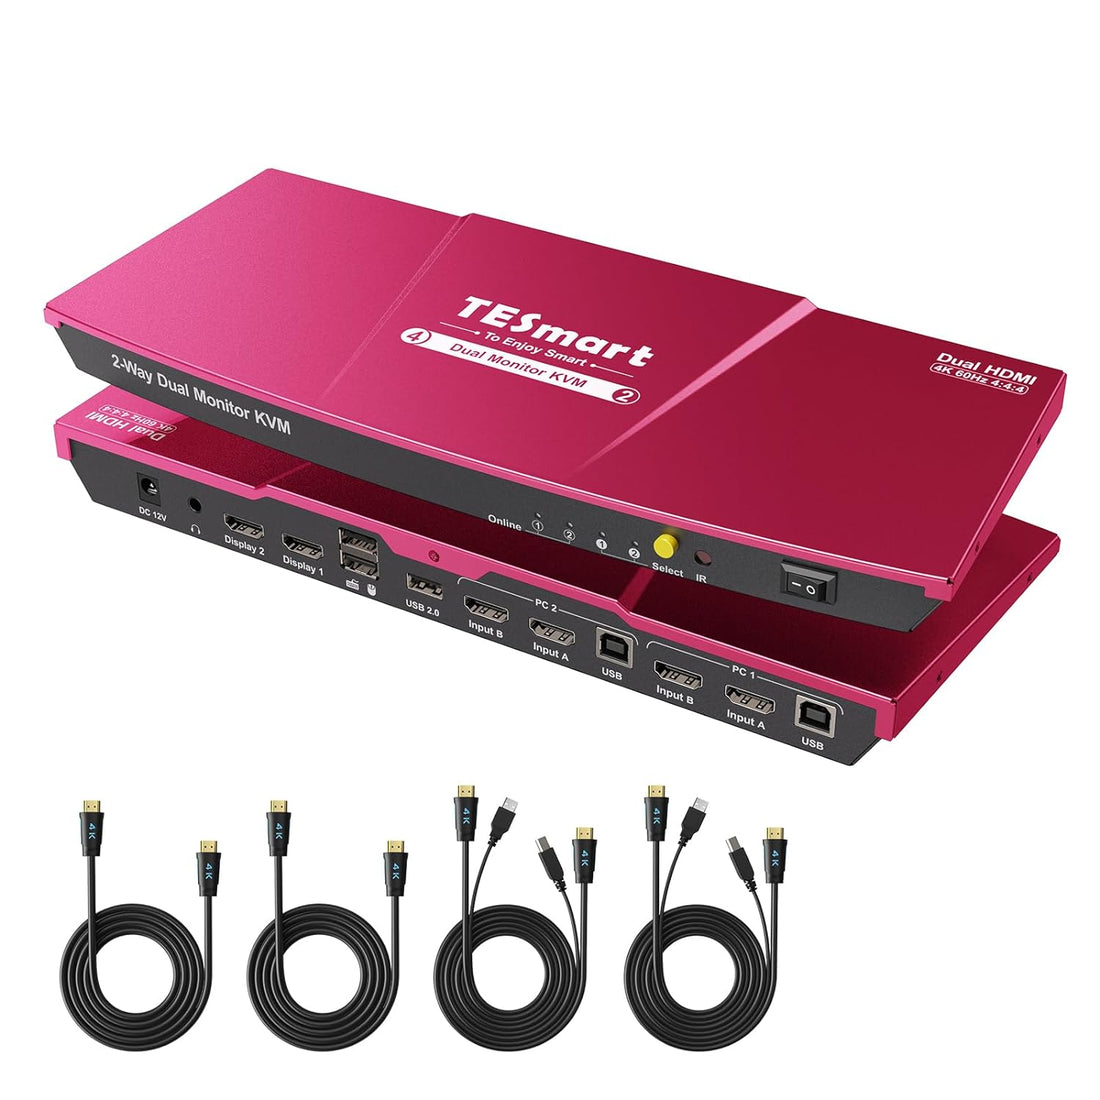 TESmart Dual HDMI 4x2 Dual Monitor KVM Switch 2 Port Updated 4K @60Hz, Support HDCP 2.2(Red)